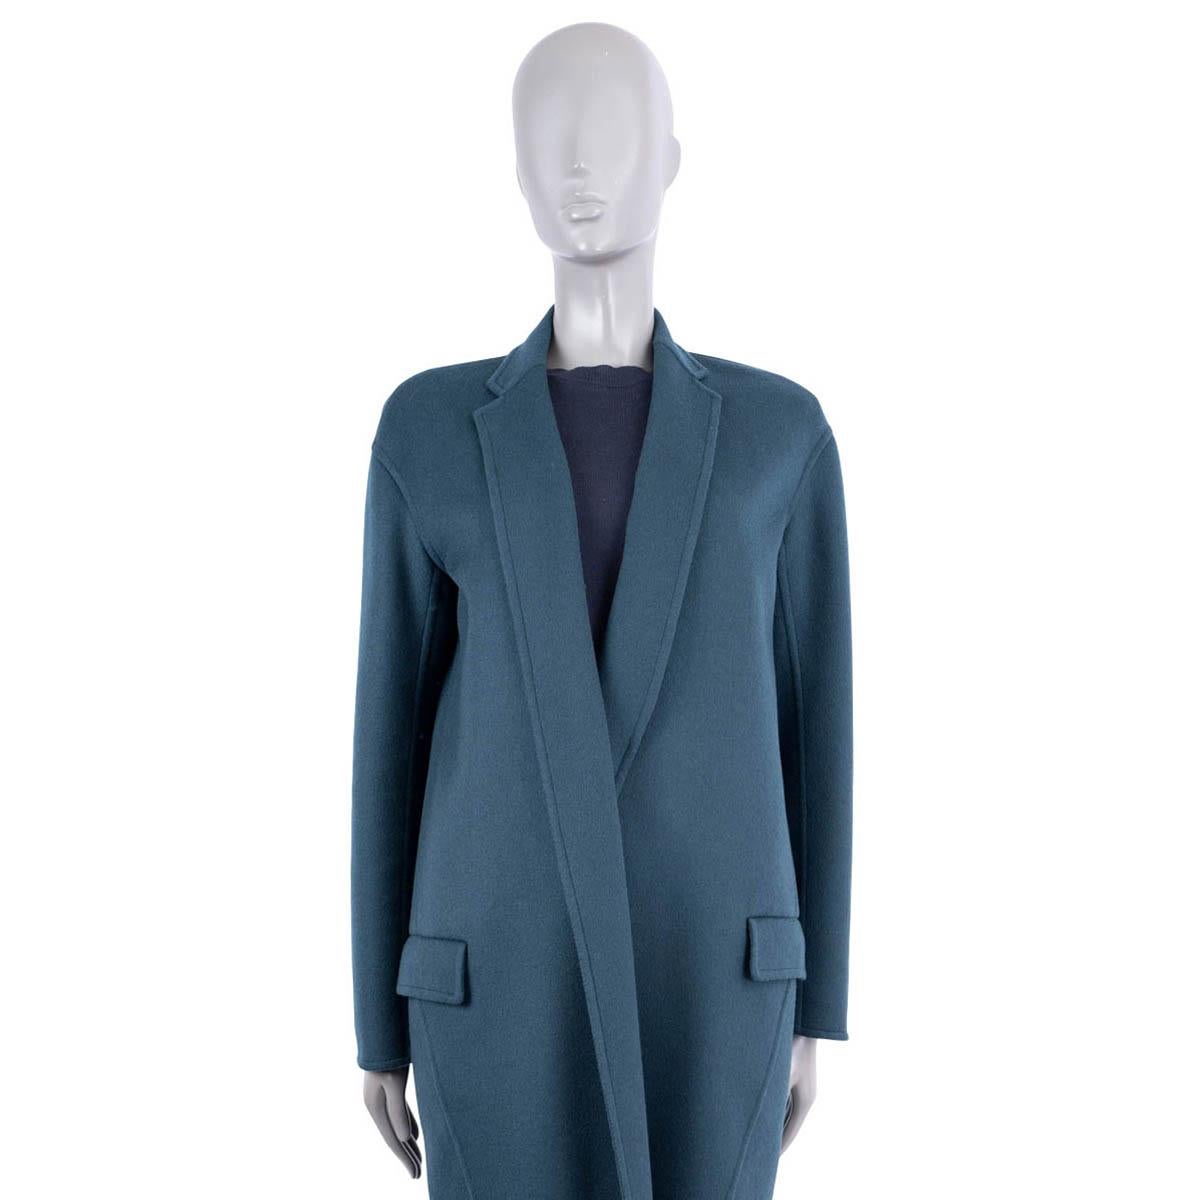 100% authentic Céline by Phoebe Philo cocoon coat in petrol cashmere (100%). Features a cocoon silhouette, two flap pockets on the front, drop shoulder and a slit on the back. Has been worn and is in excellent condition.

Measurements
Tag